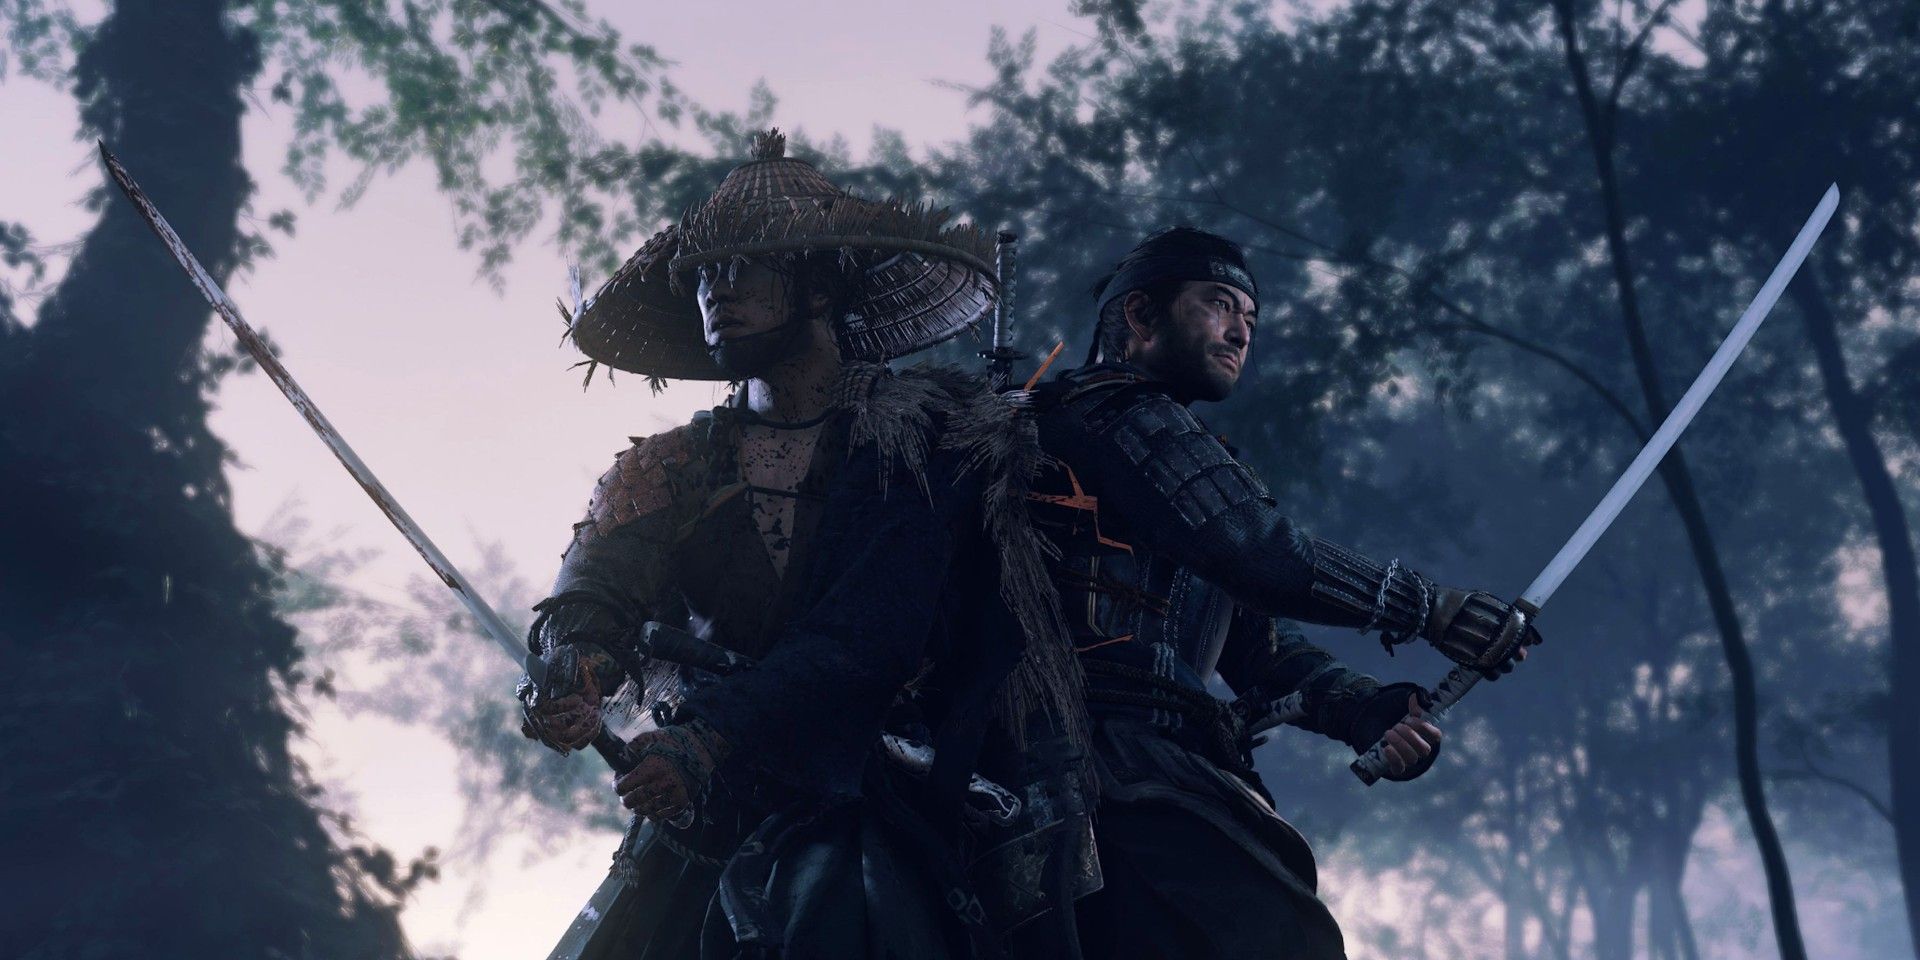 Ghost of Tsushima’s Combat Gets Better the More You Play